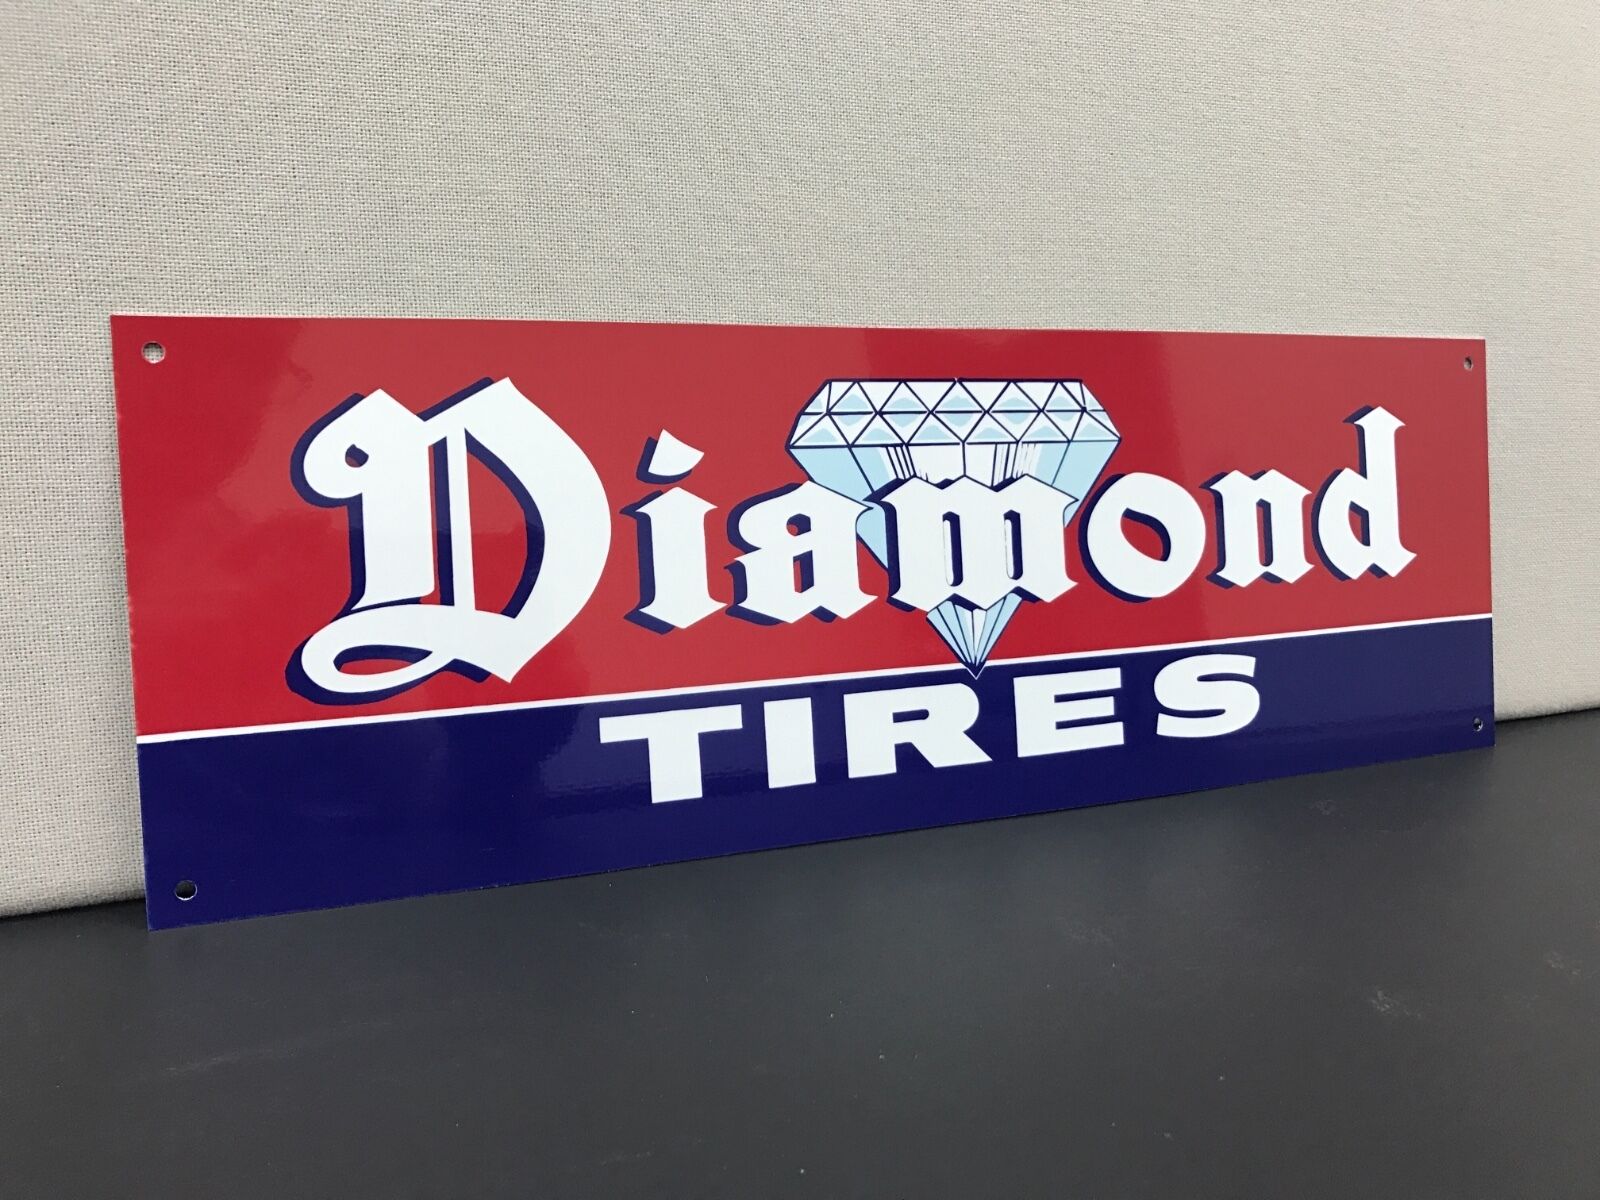 Diamond tire vintage style advertising metal sign baked